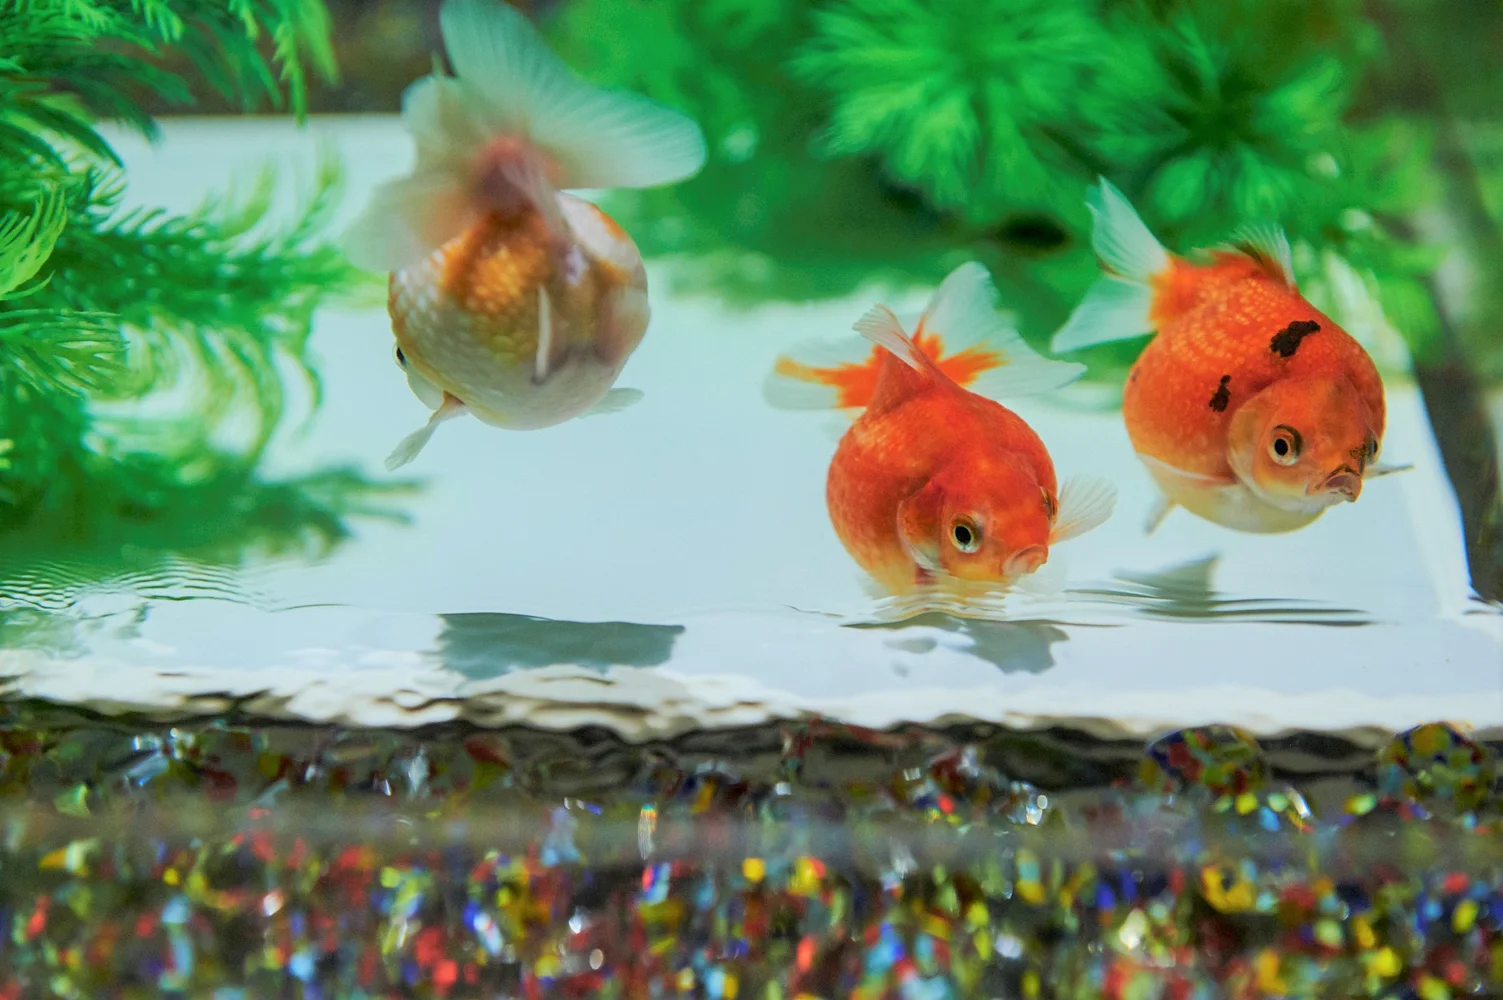 Ping Pong Pearl : As the name suggests, this goldfish has a body shape like a round ball. Its adorable form and swimming style make it a popular fish at the museum.